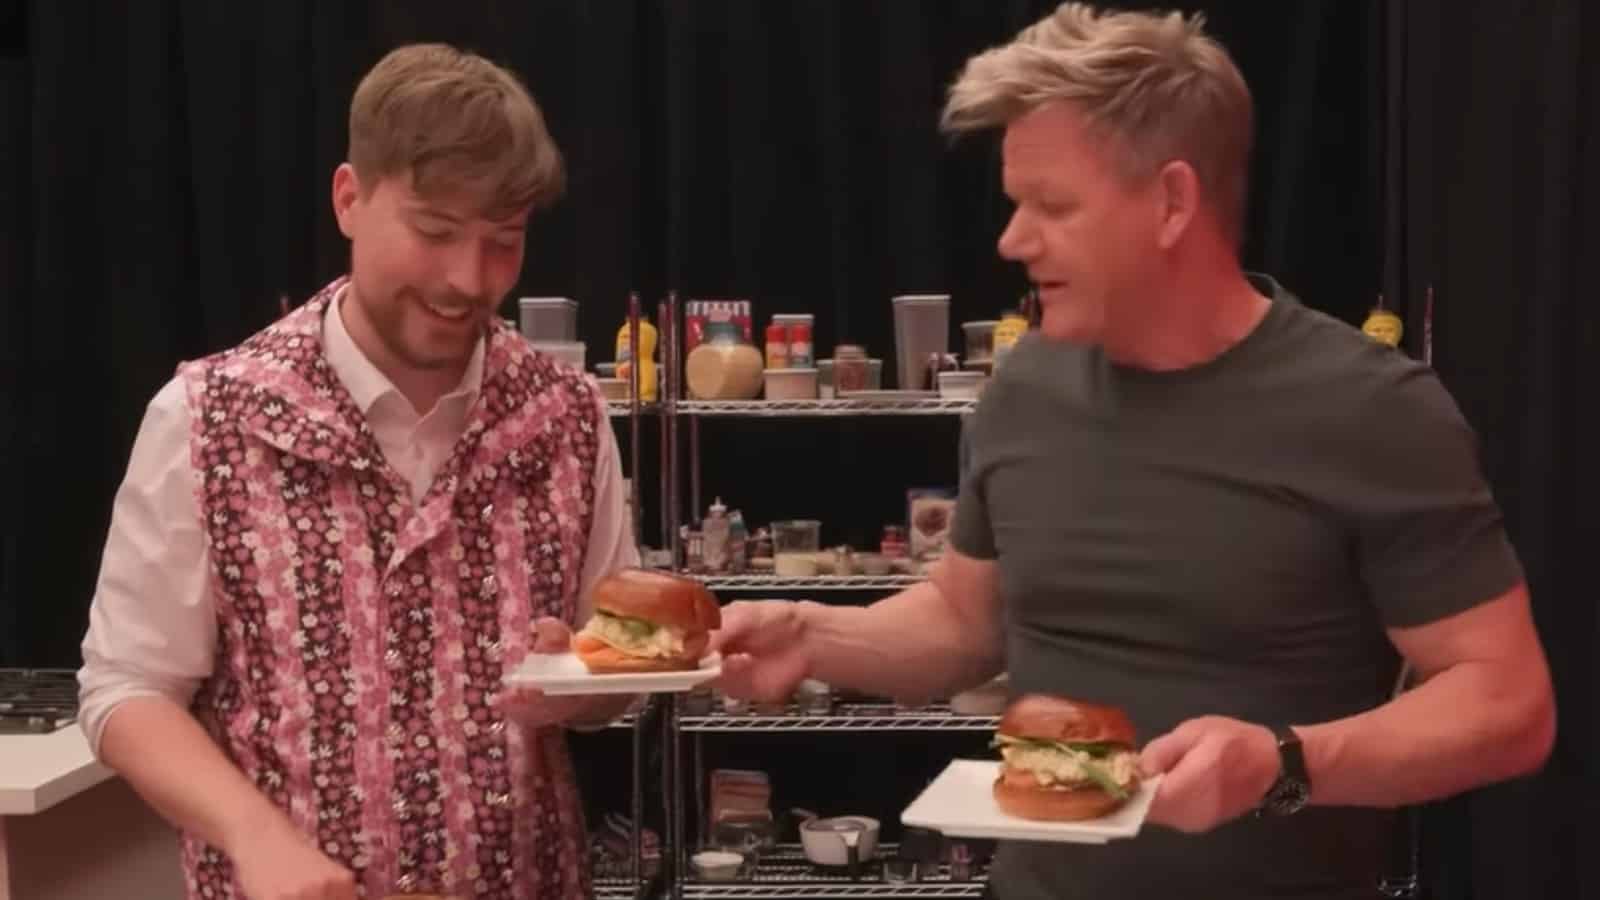 Gordon Ramsay cooking for MrBeast in his YouTube video